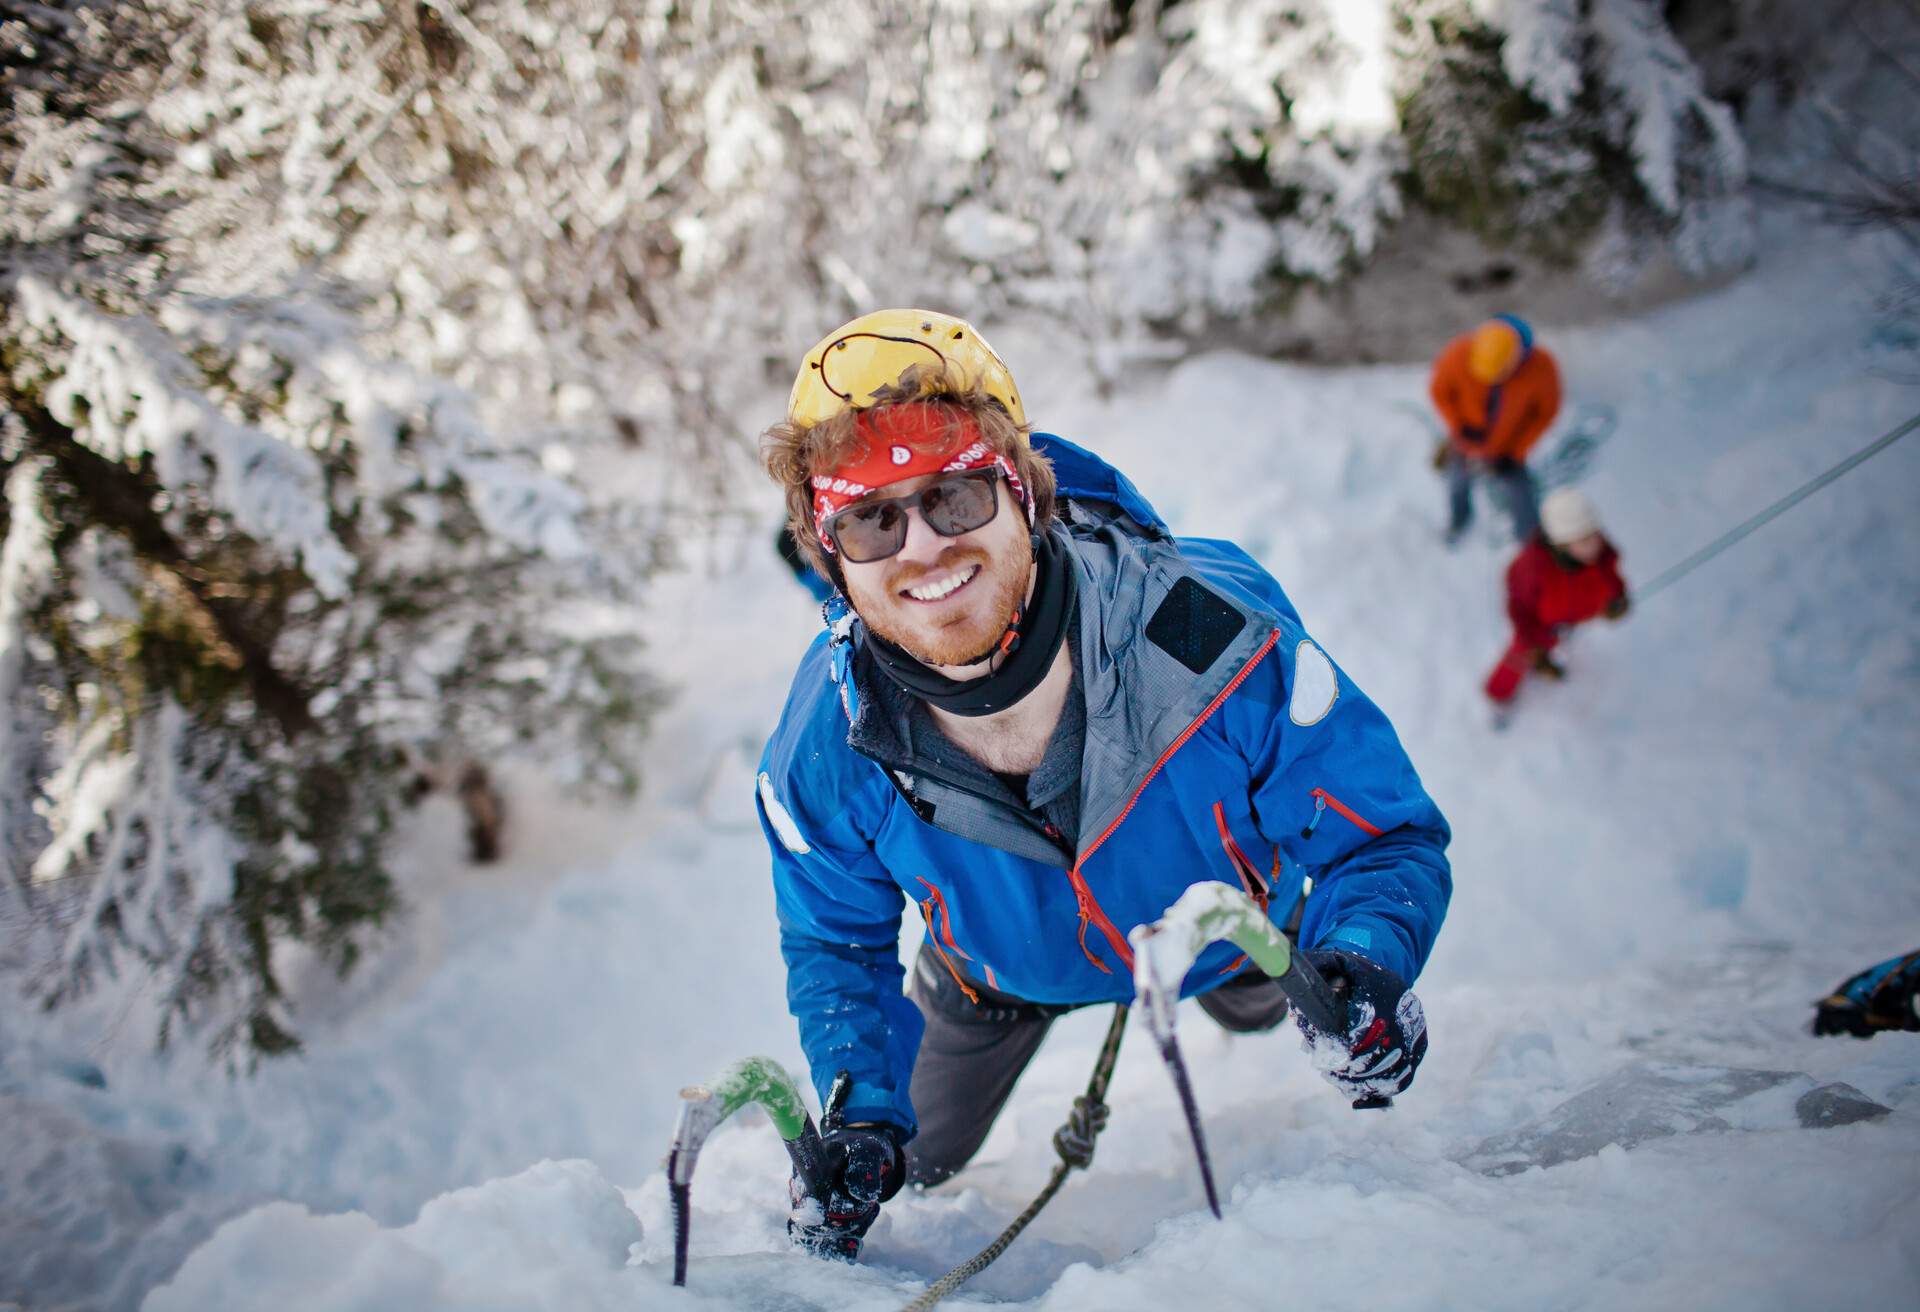 DEST_CANADA_WHISTLER_ICE_CLIMBING_PEOPLE_GettyImages-548283247